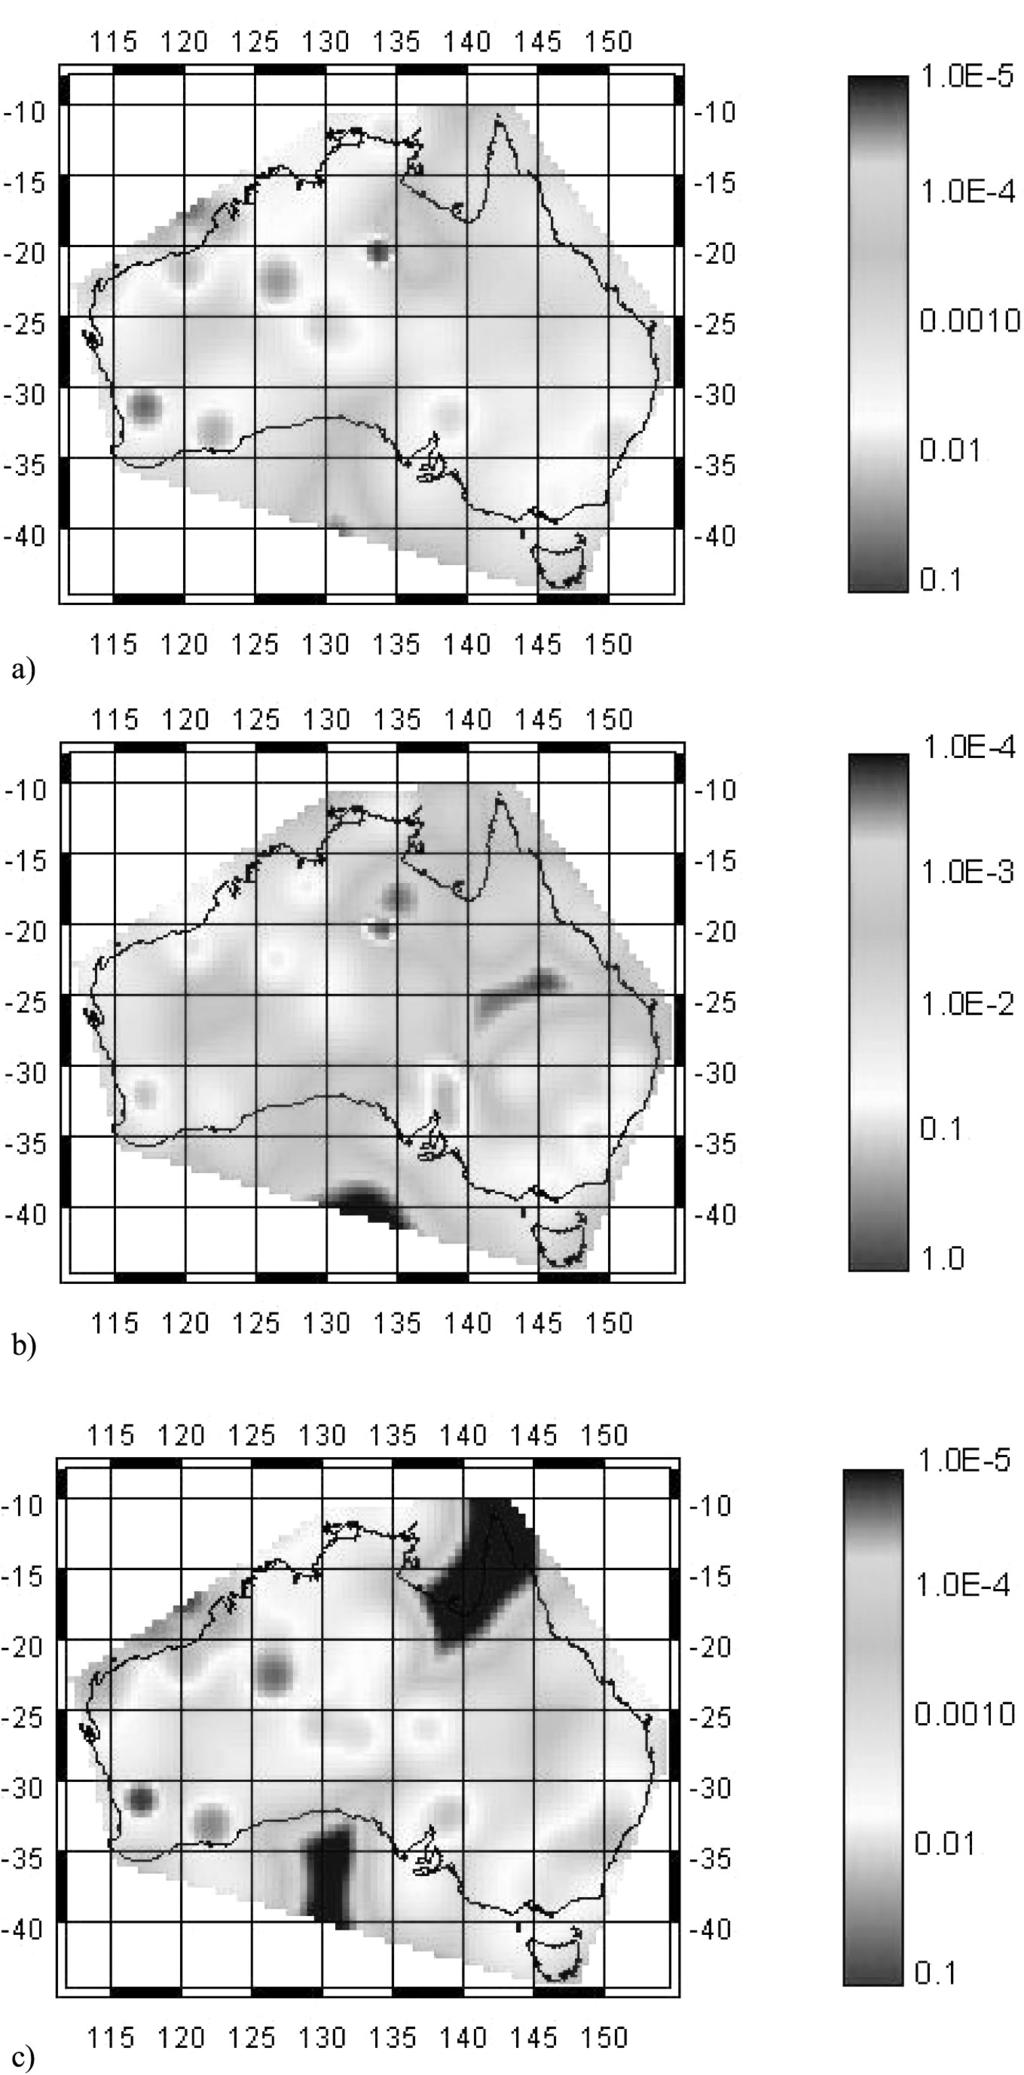 912 C. Stock and E. G. C. Smith Figure 5. The probability distribution of crustal earthquakes in Australia (above 50 km) above magnitude 4.0 in 0.